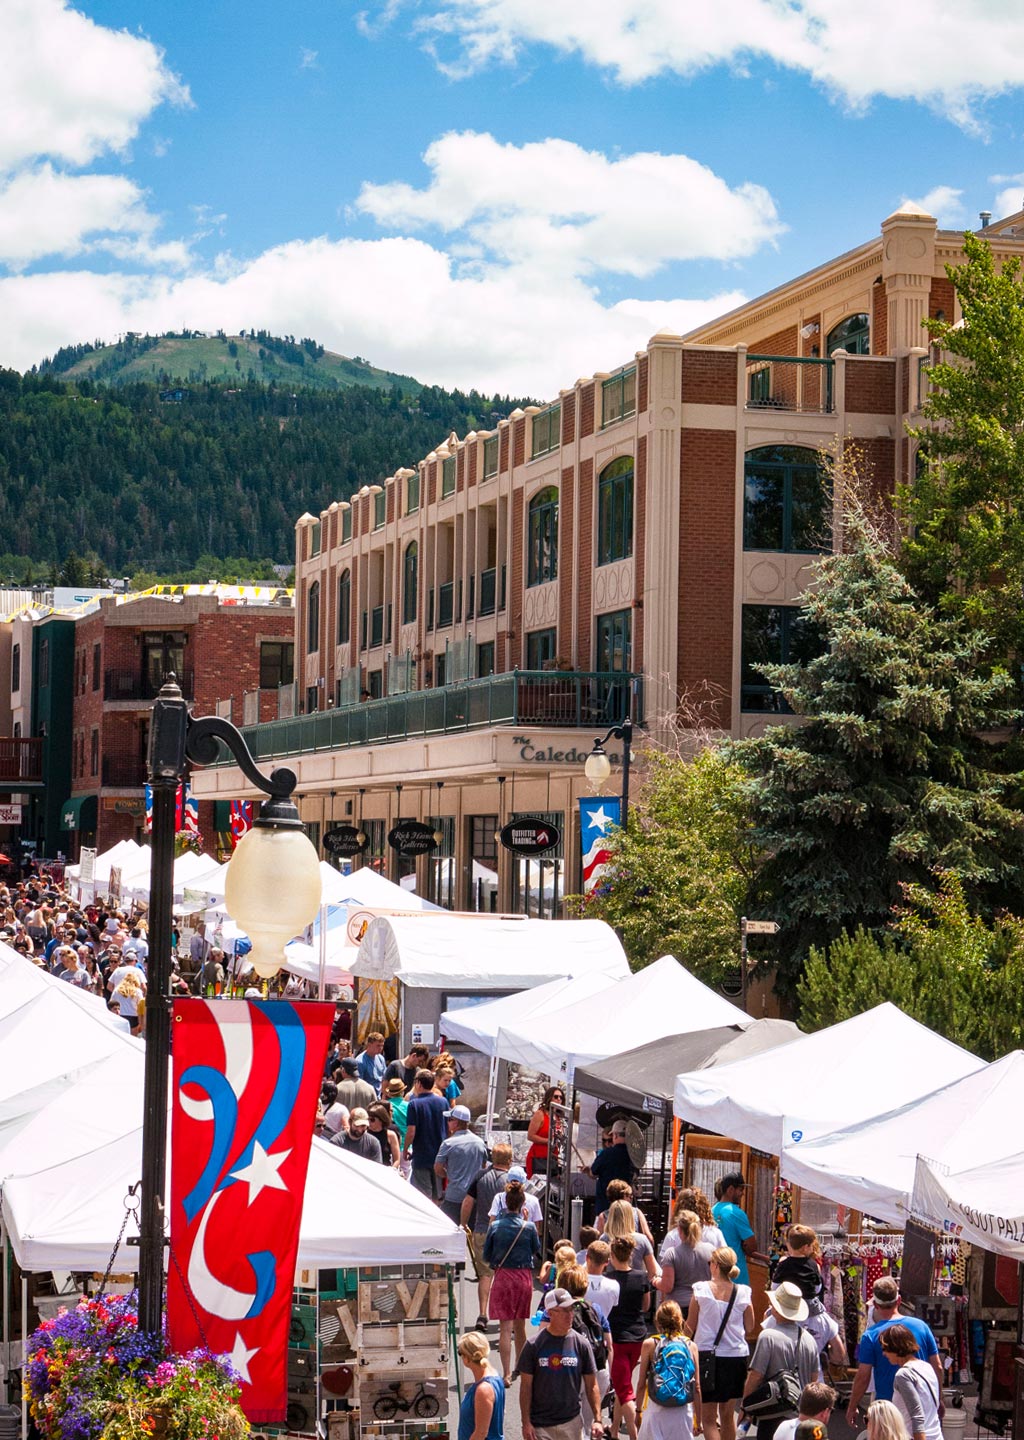 Park Silly Sunday festival on Main Street Park City during summer time. The Caledonian Hotel in the mid-ground, Deer Valley rises in the background